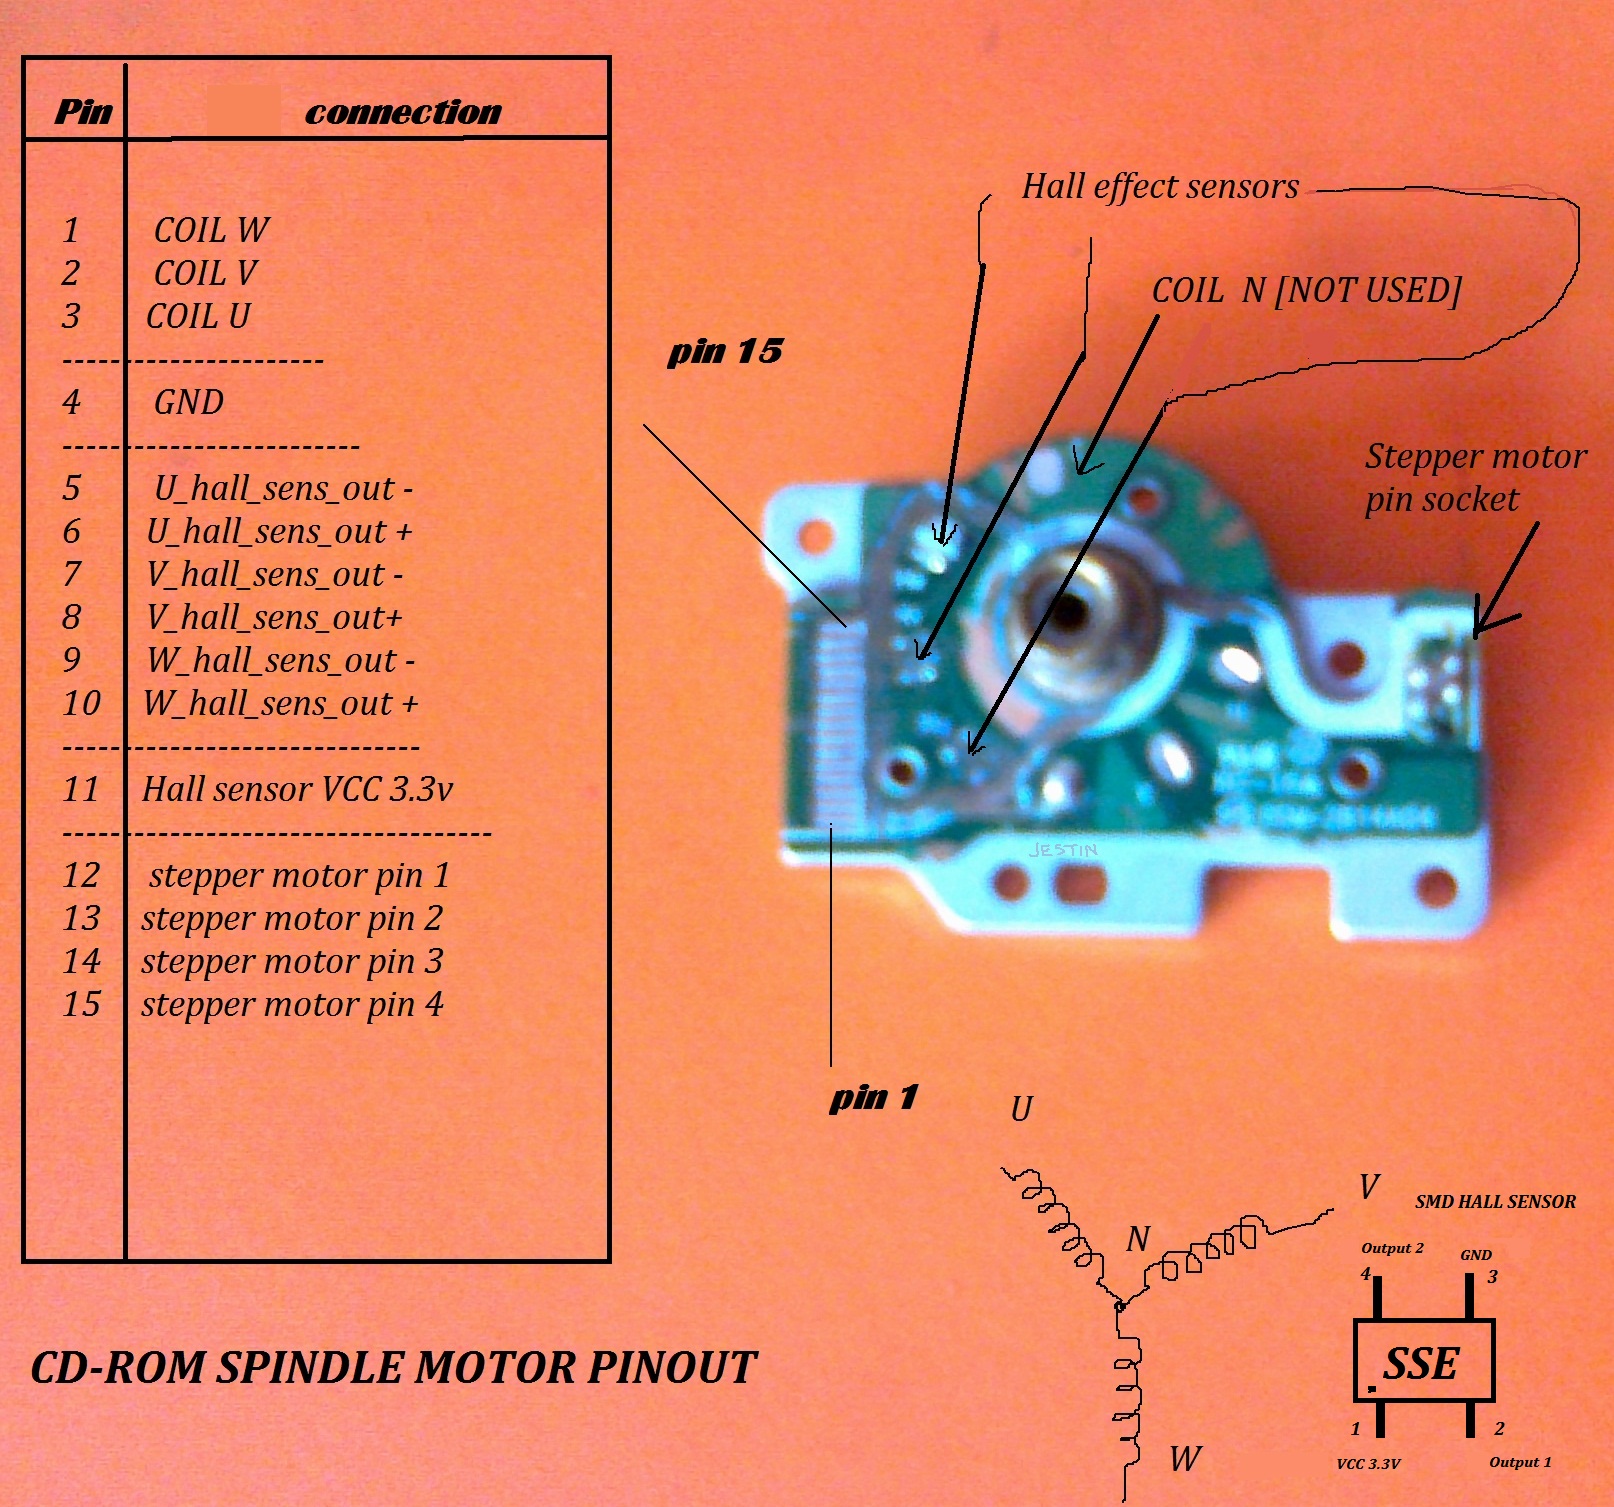 cd rom spindle  Motor Pinout